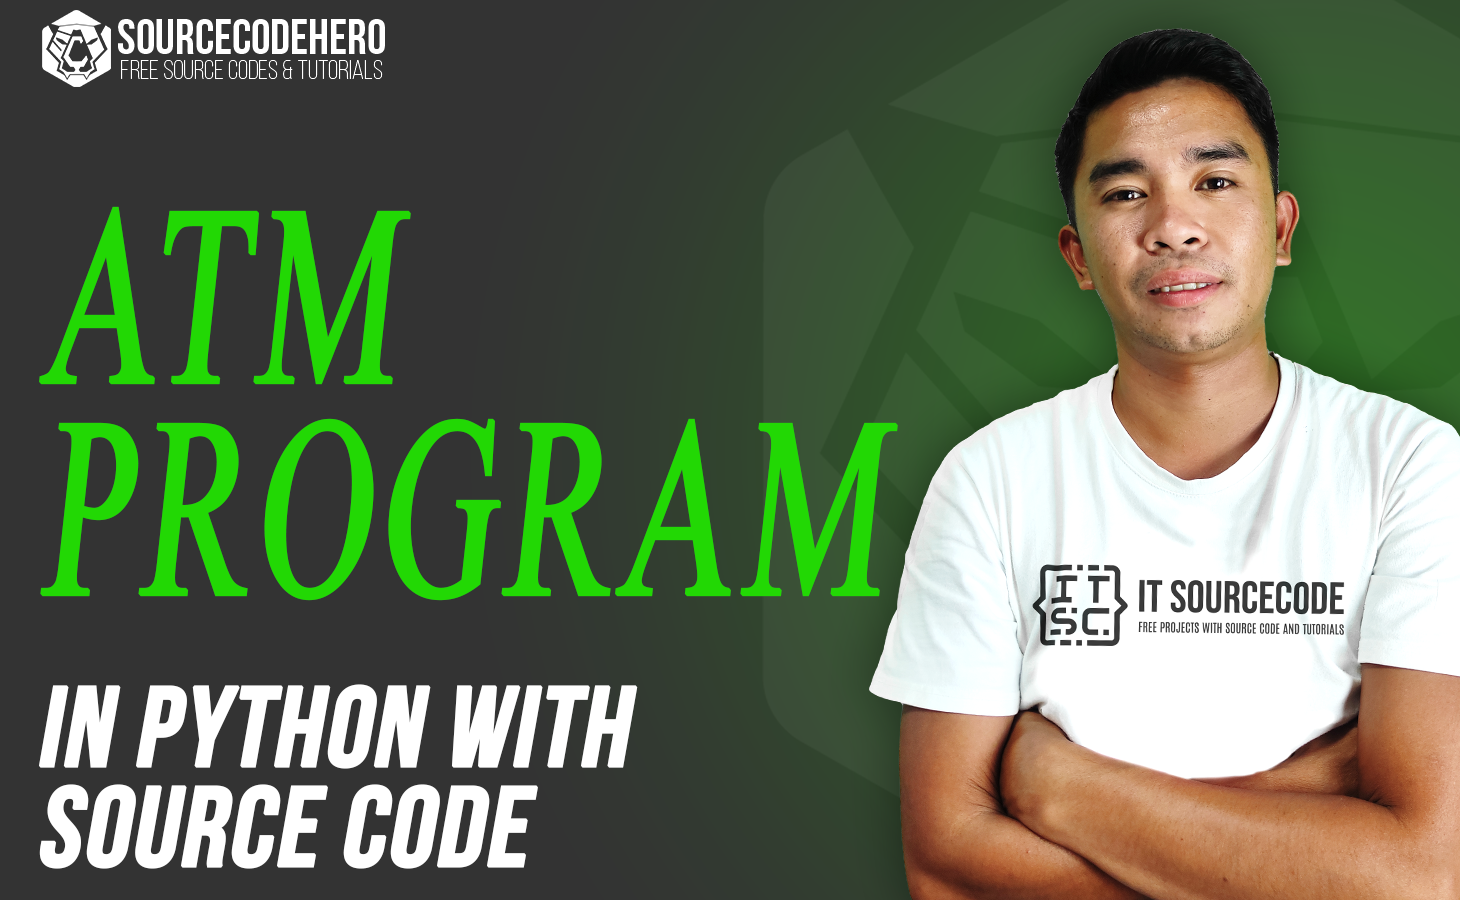 atm-program-in-python-with-source-code-sourcecodehero